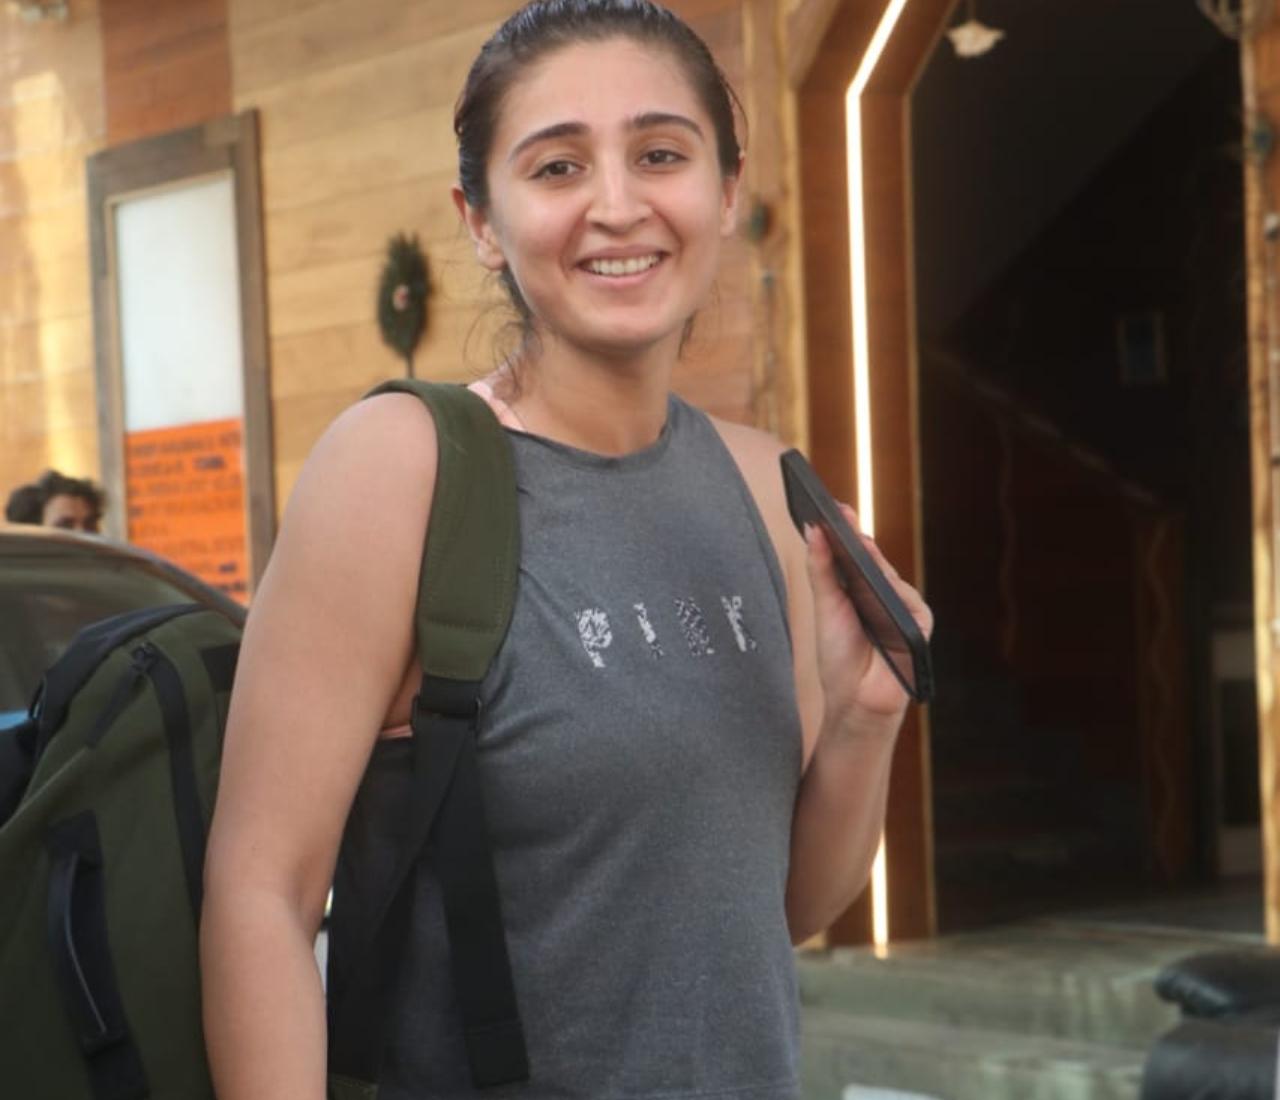 Singer Dhvani Bhanushali was also clicked in Juhu. She opted for grey crop top and trousers for the outing.